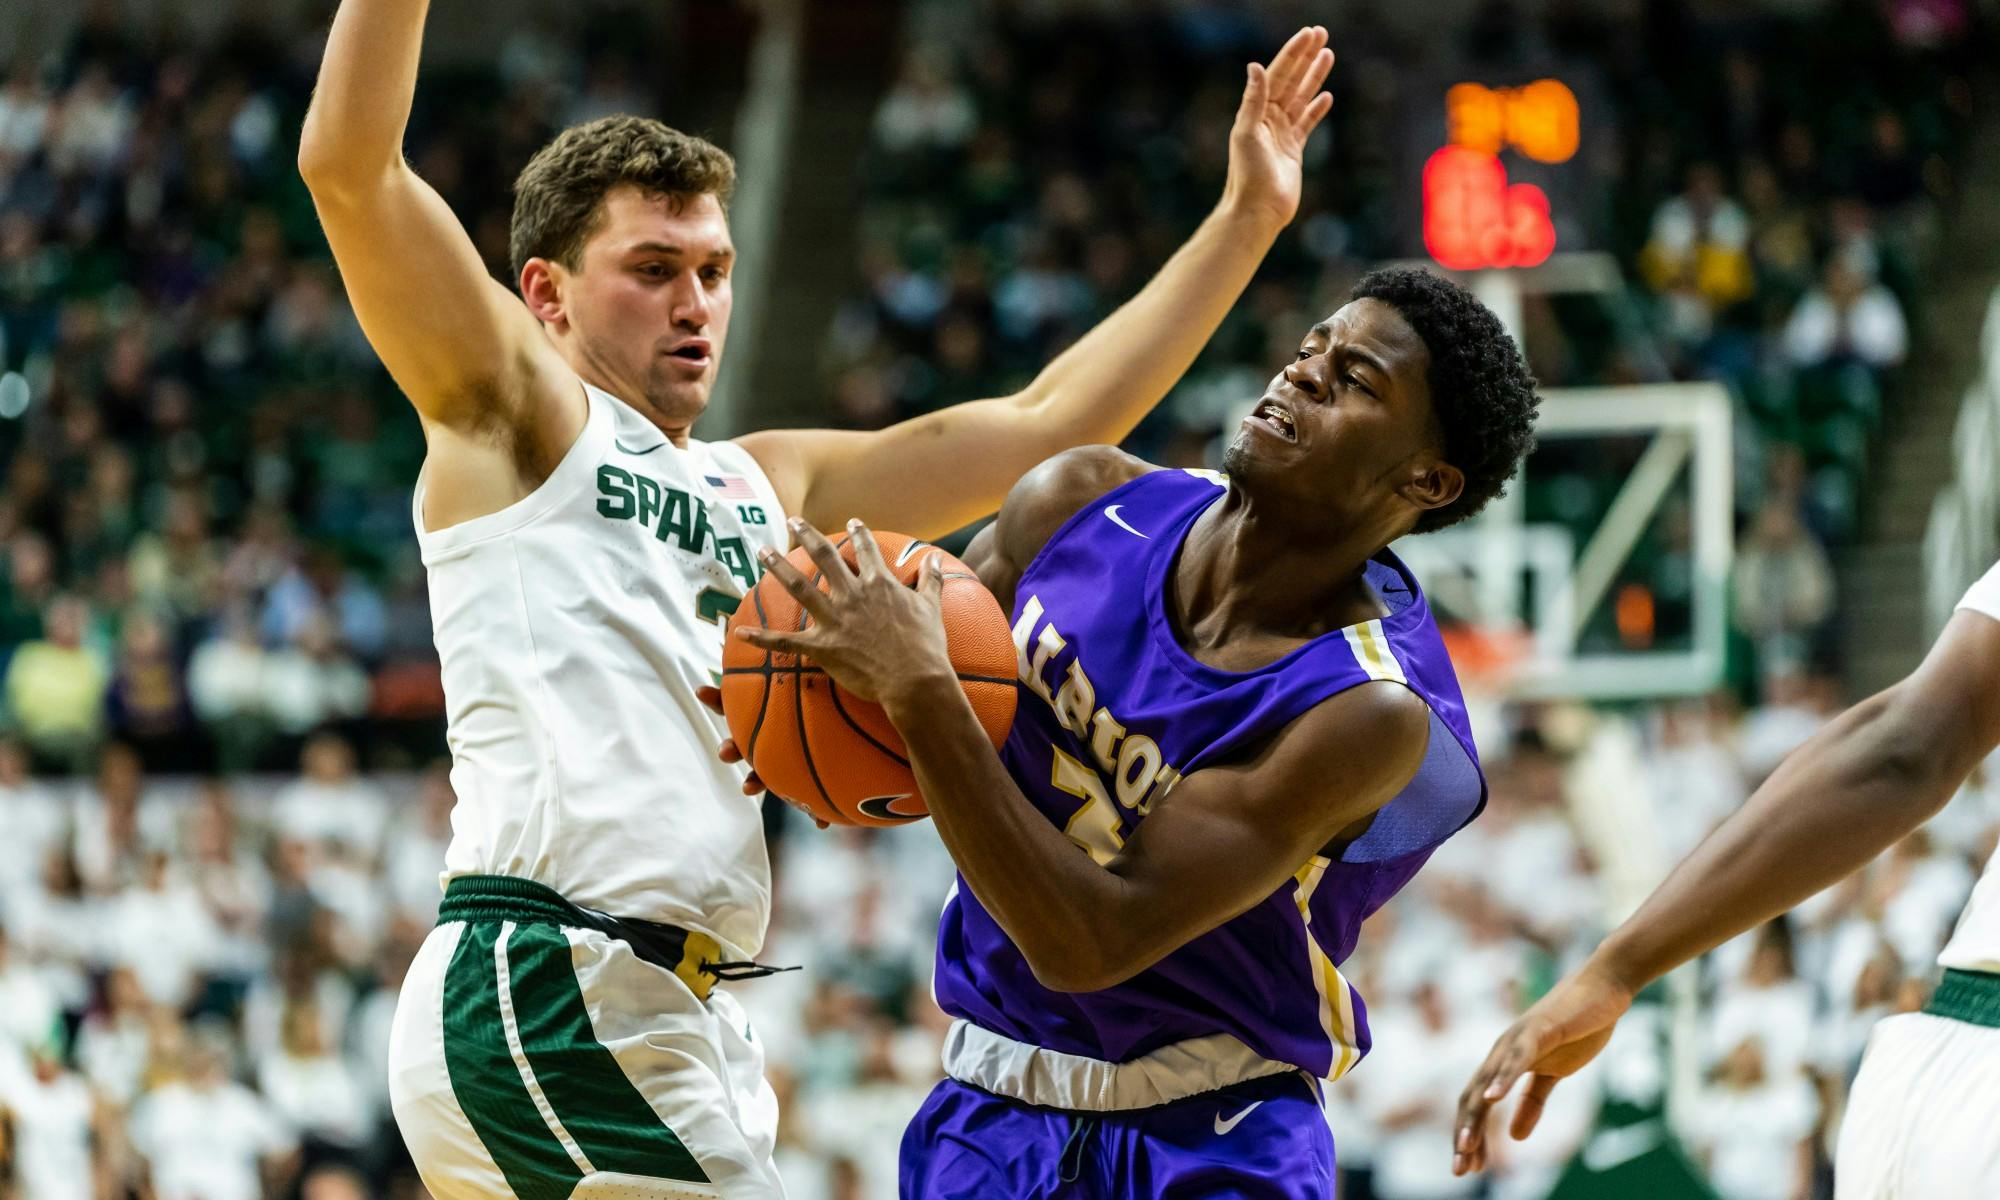 <p>Then-sophomore guard Foster Loyer (left) defends Albion guard Cortez Garland (right). The Spartans defeated the Britons, 85-50, at the Breslin Student Events Center on Oct. 29, 2019. </p>